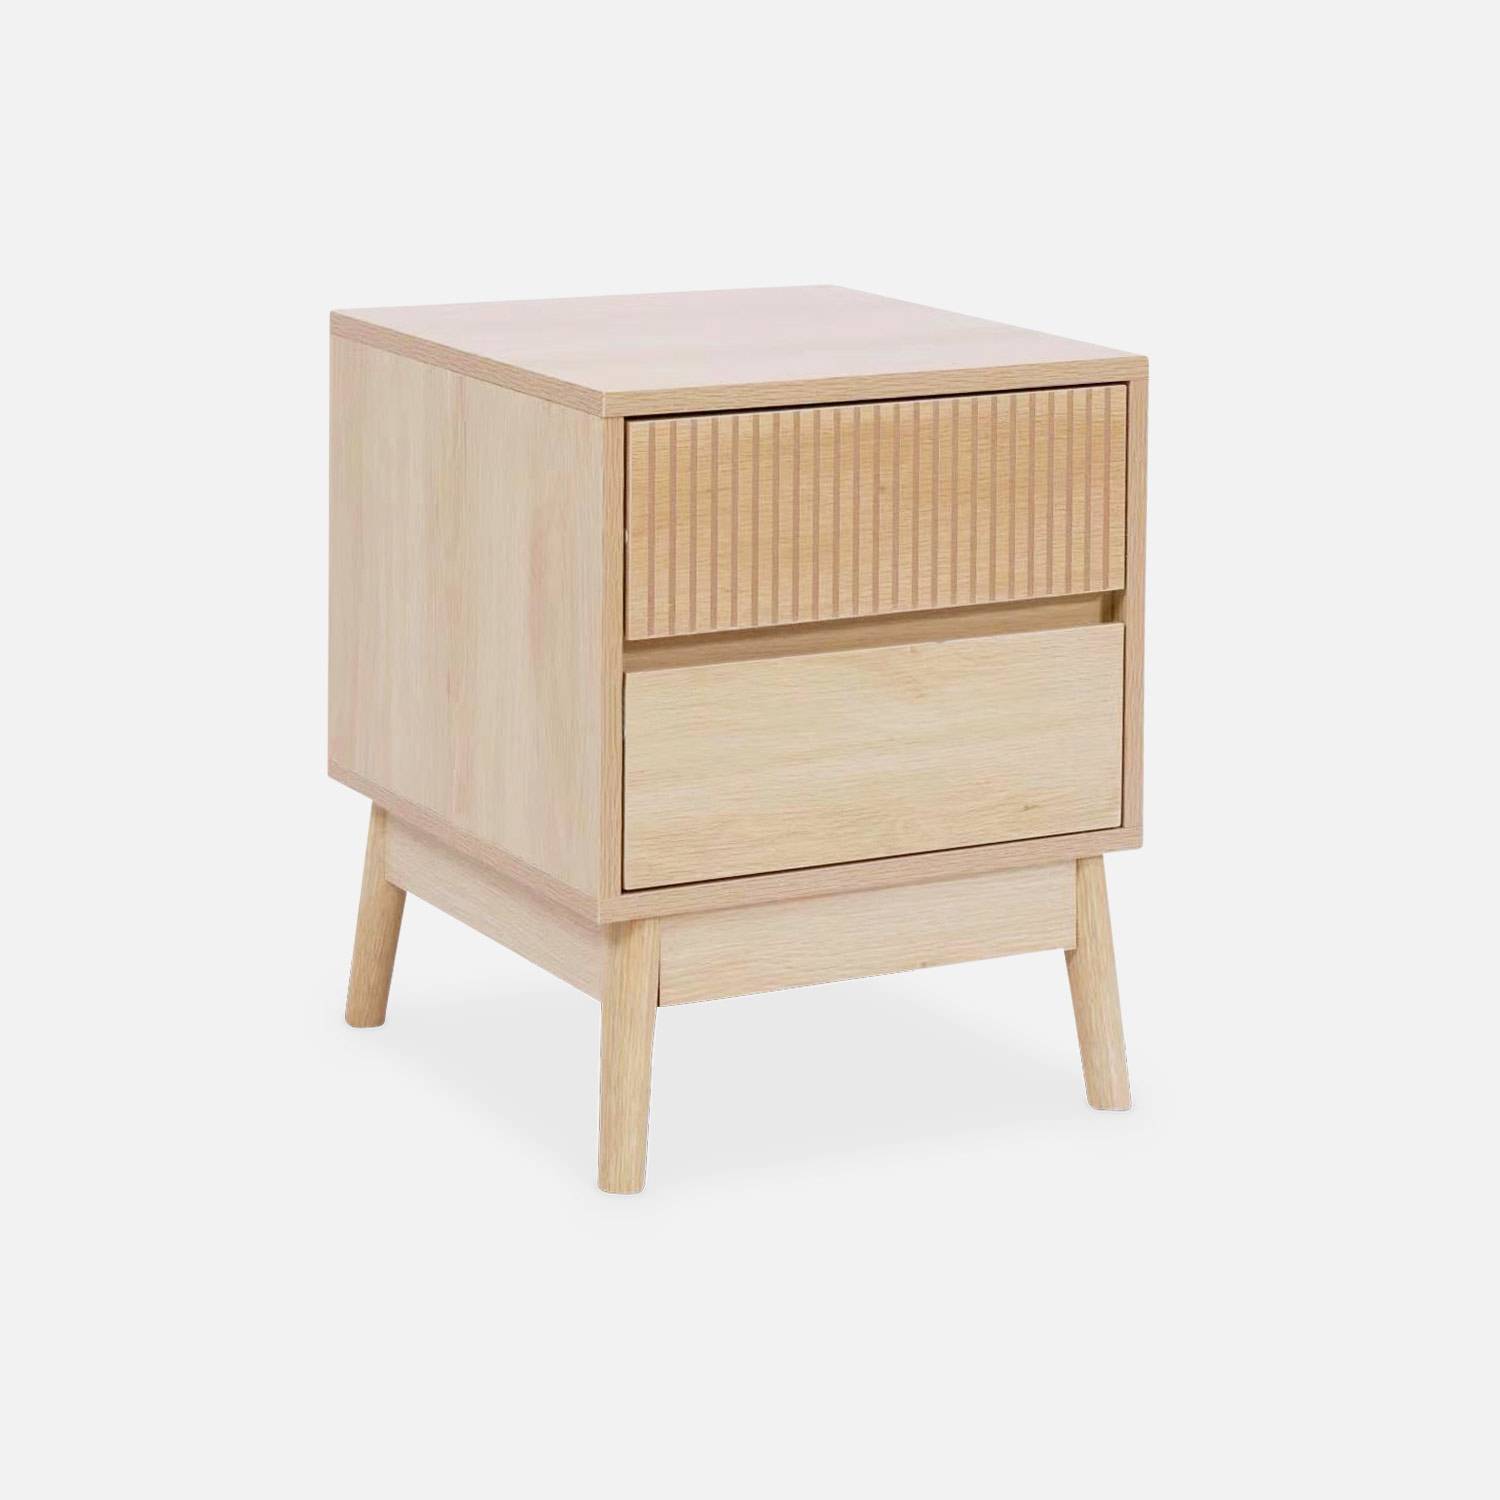 Grooved wooden bedside table with 2 drawers, 40x39x48cm, Natural Wood colour | sweeek